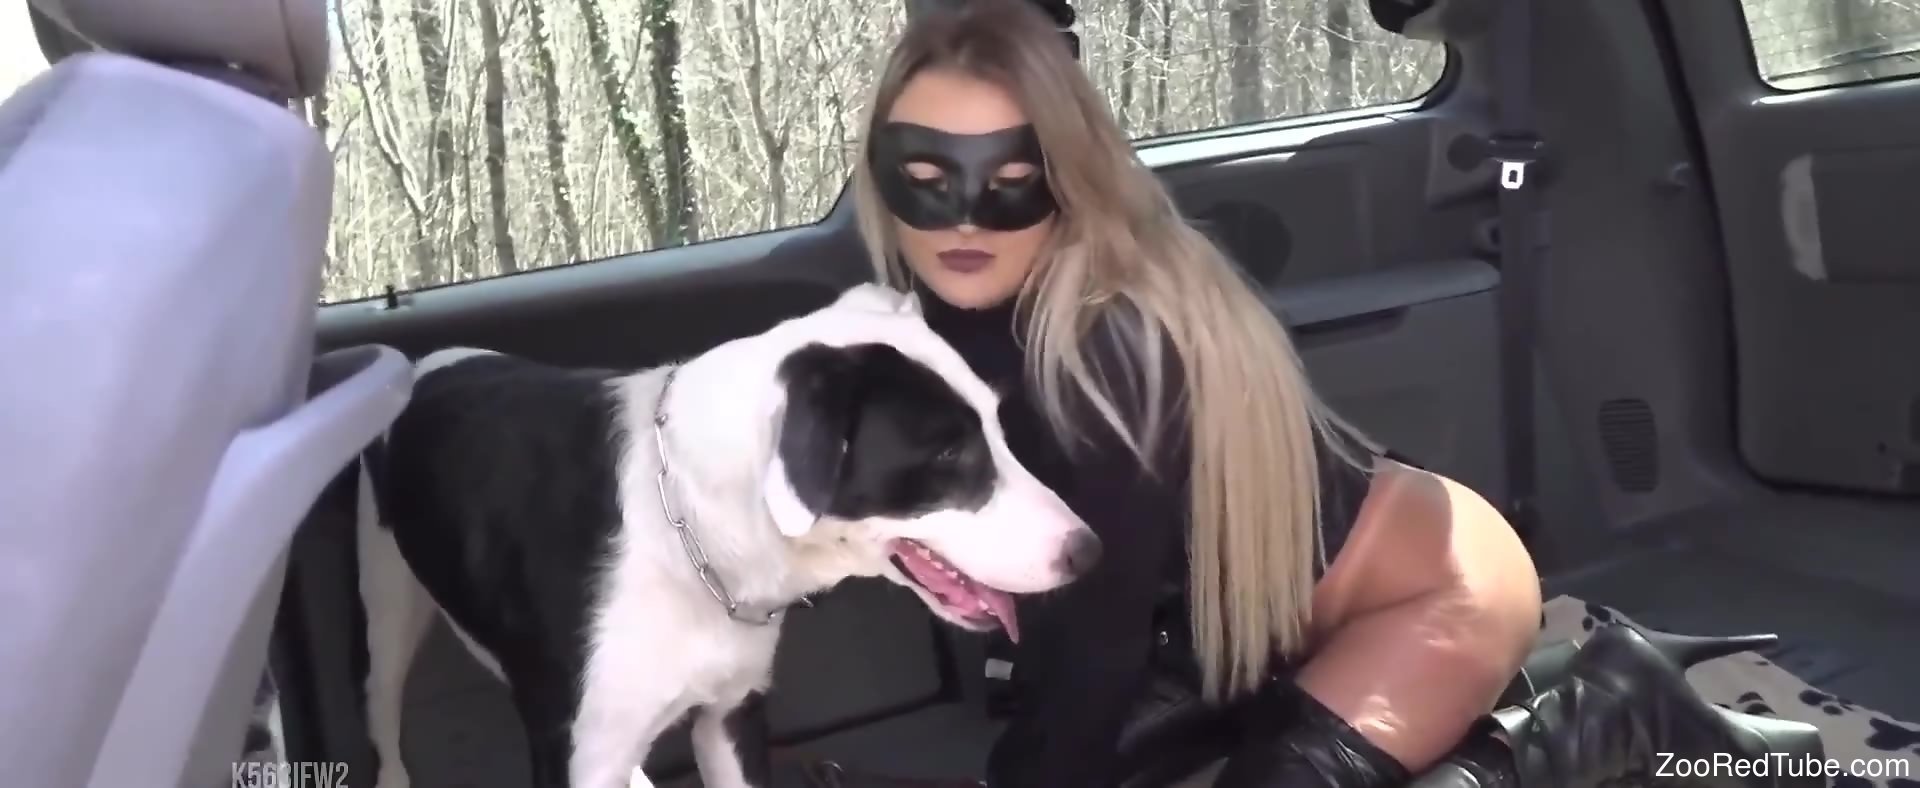 Dog Ladki Ka Bf - Fine woman with sexy ass, doggy porn with a real dog in the car